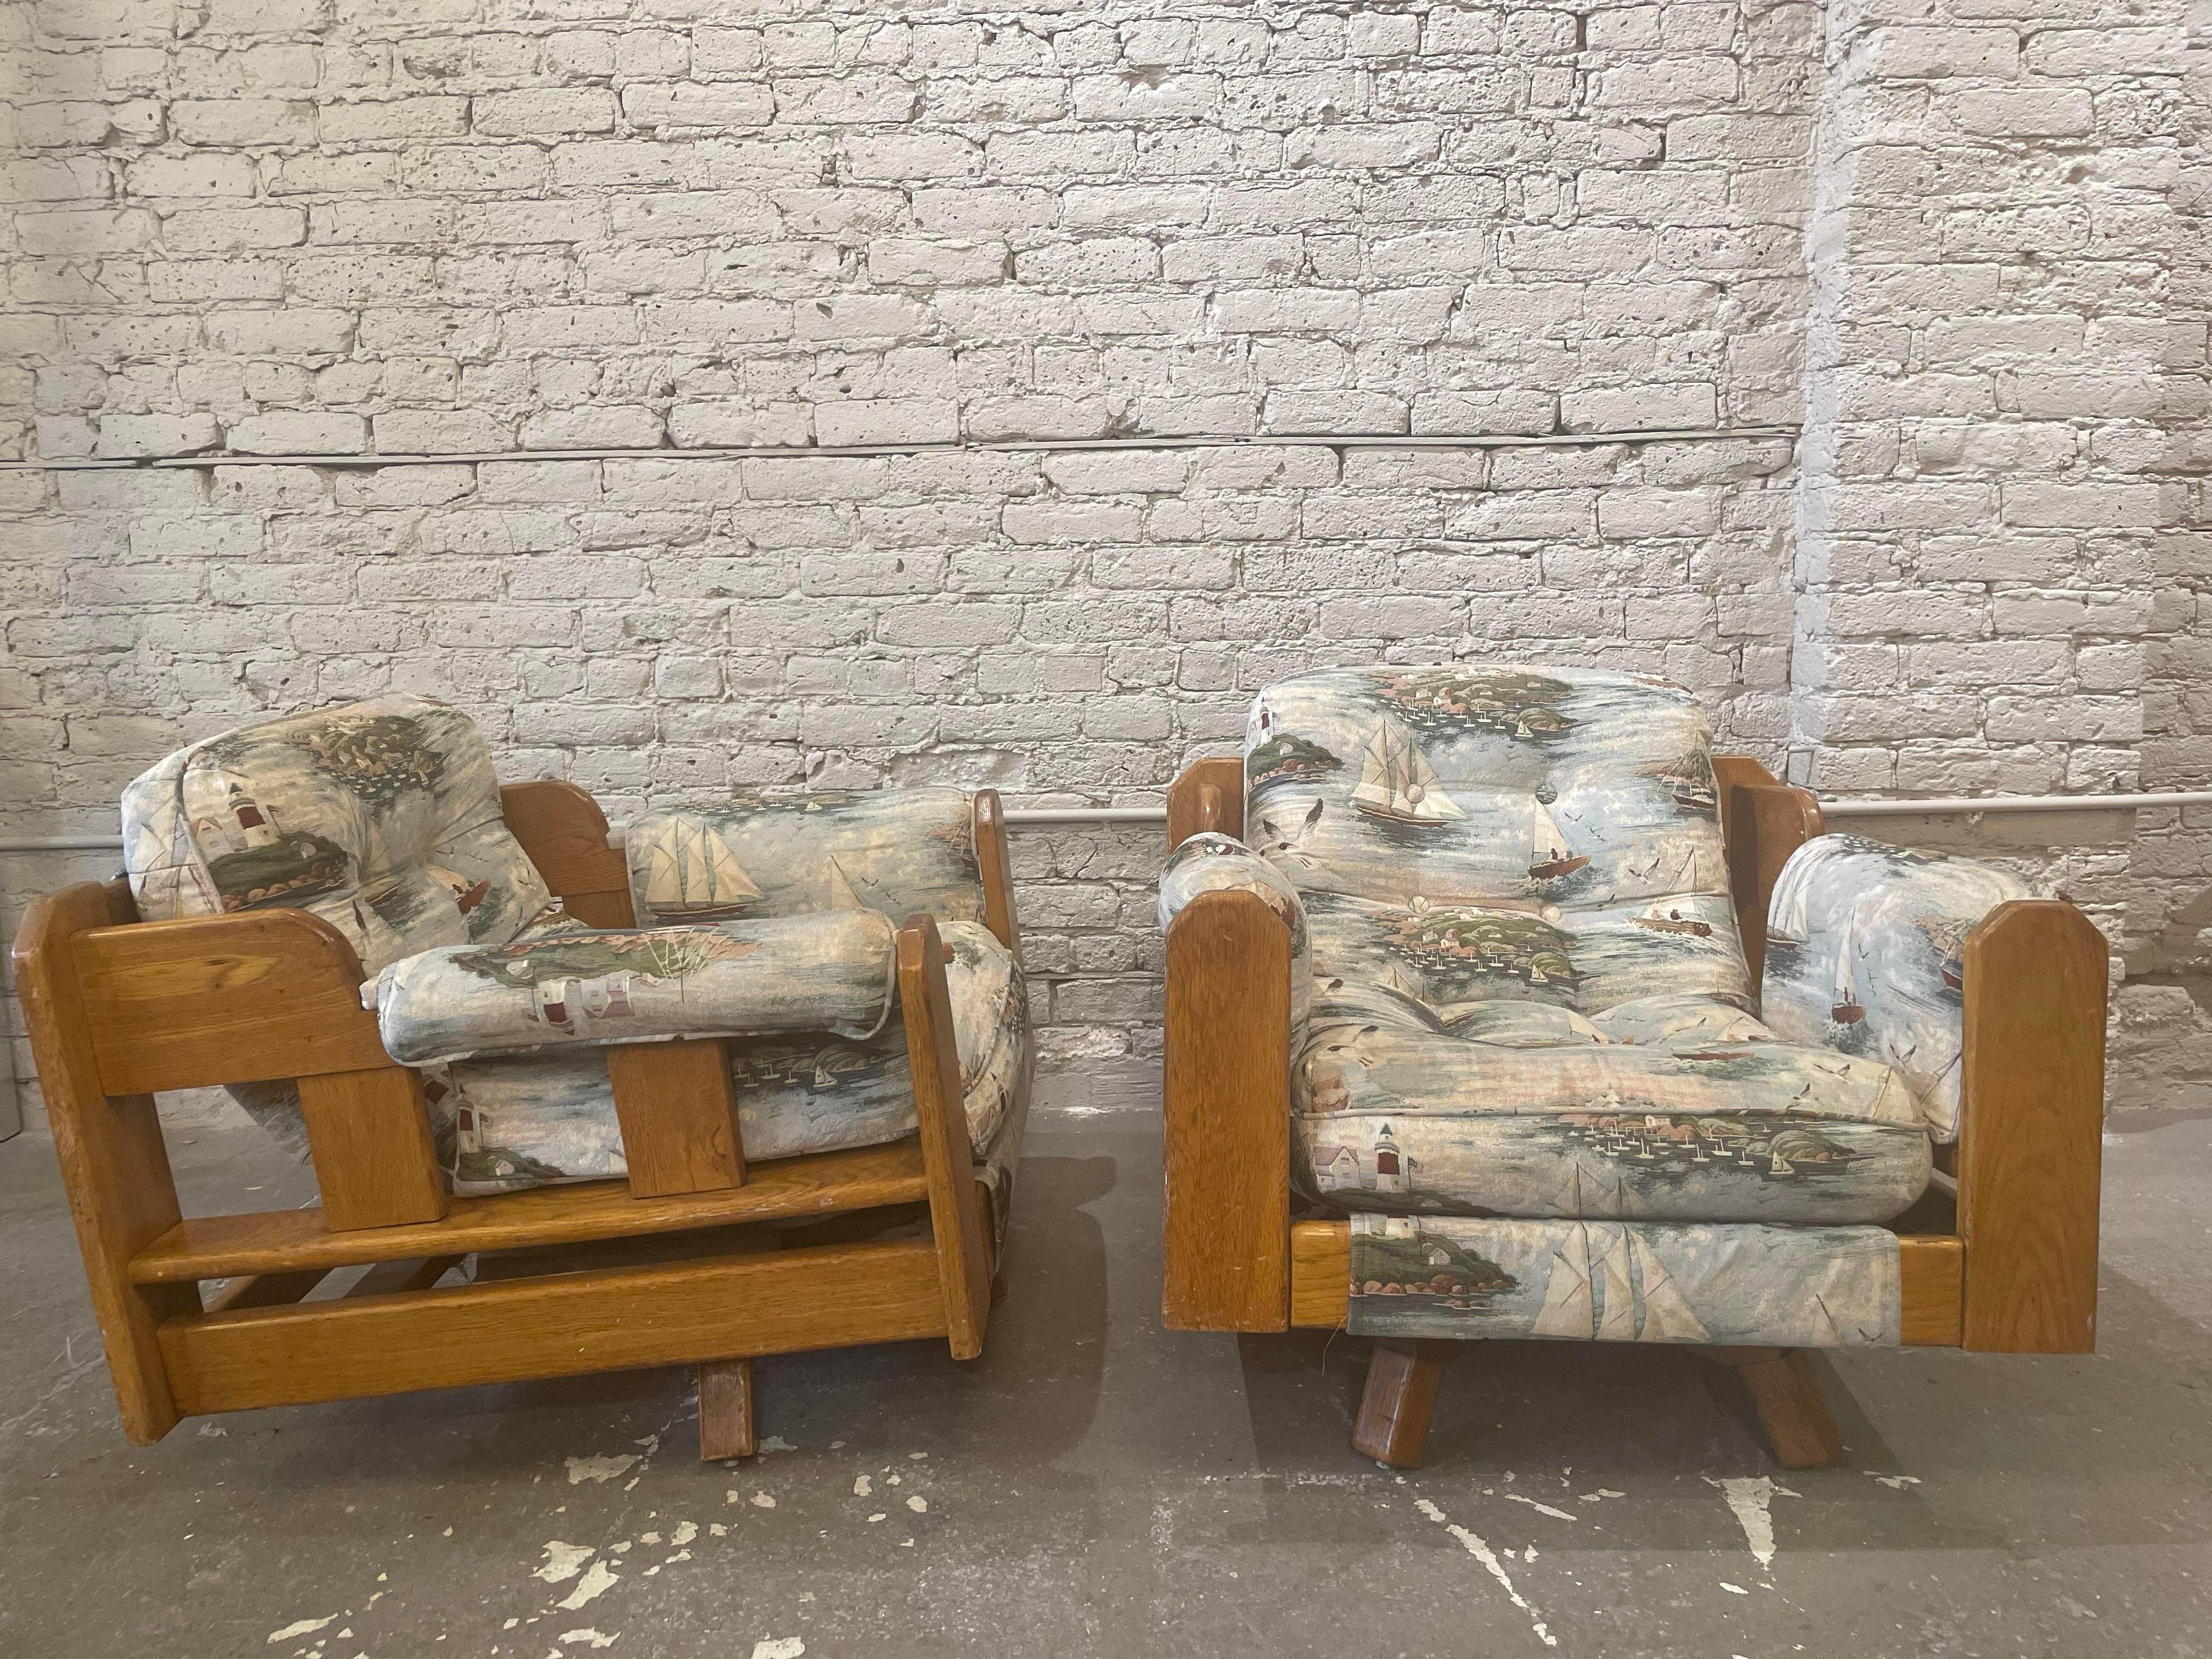 1980s Vintage Wood Rustic Swivel Chairs - a Pair For Sale 1